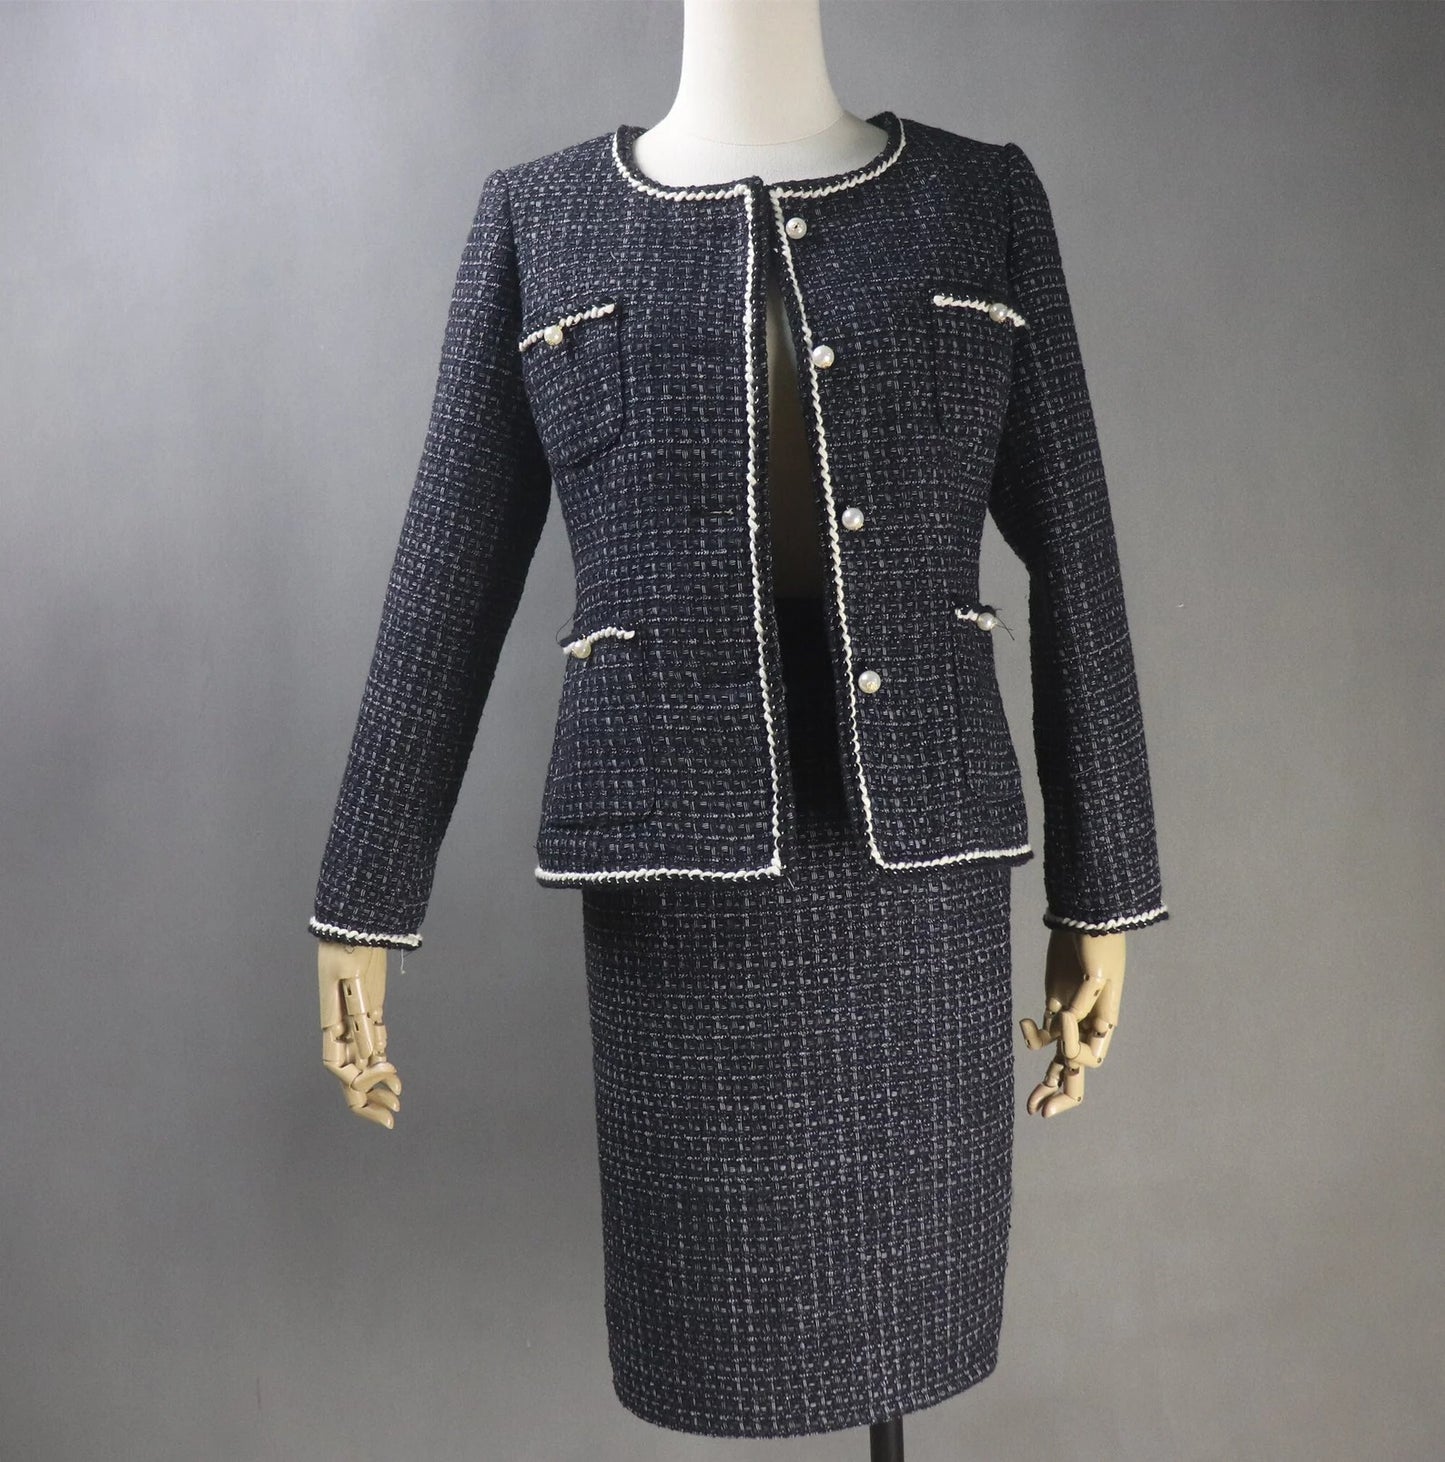 Women Custom Made Tweed Black Jacket + Dress/Shorts/ Pencil Skirt Suit(more than 10% discount) - We are happy to make as per customer size like Oversized, Plus Size, Extra Size, Perfect body measure ,Small size ,Large size. Our tailor will make perfect Tweed fabric for you. This is all season dress, can wear for outside, weddings , ceremony, Events and functions.